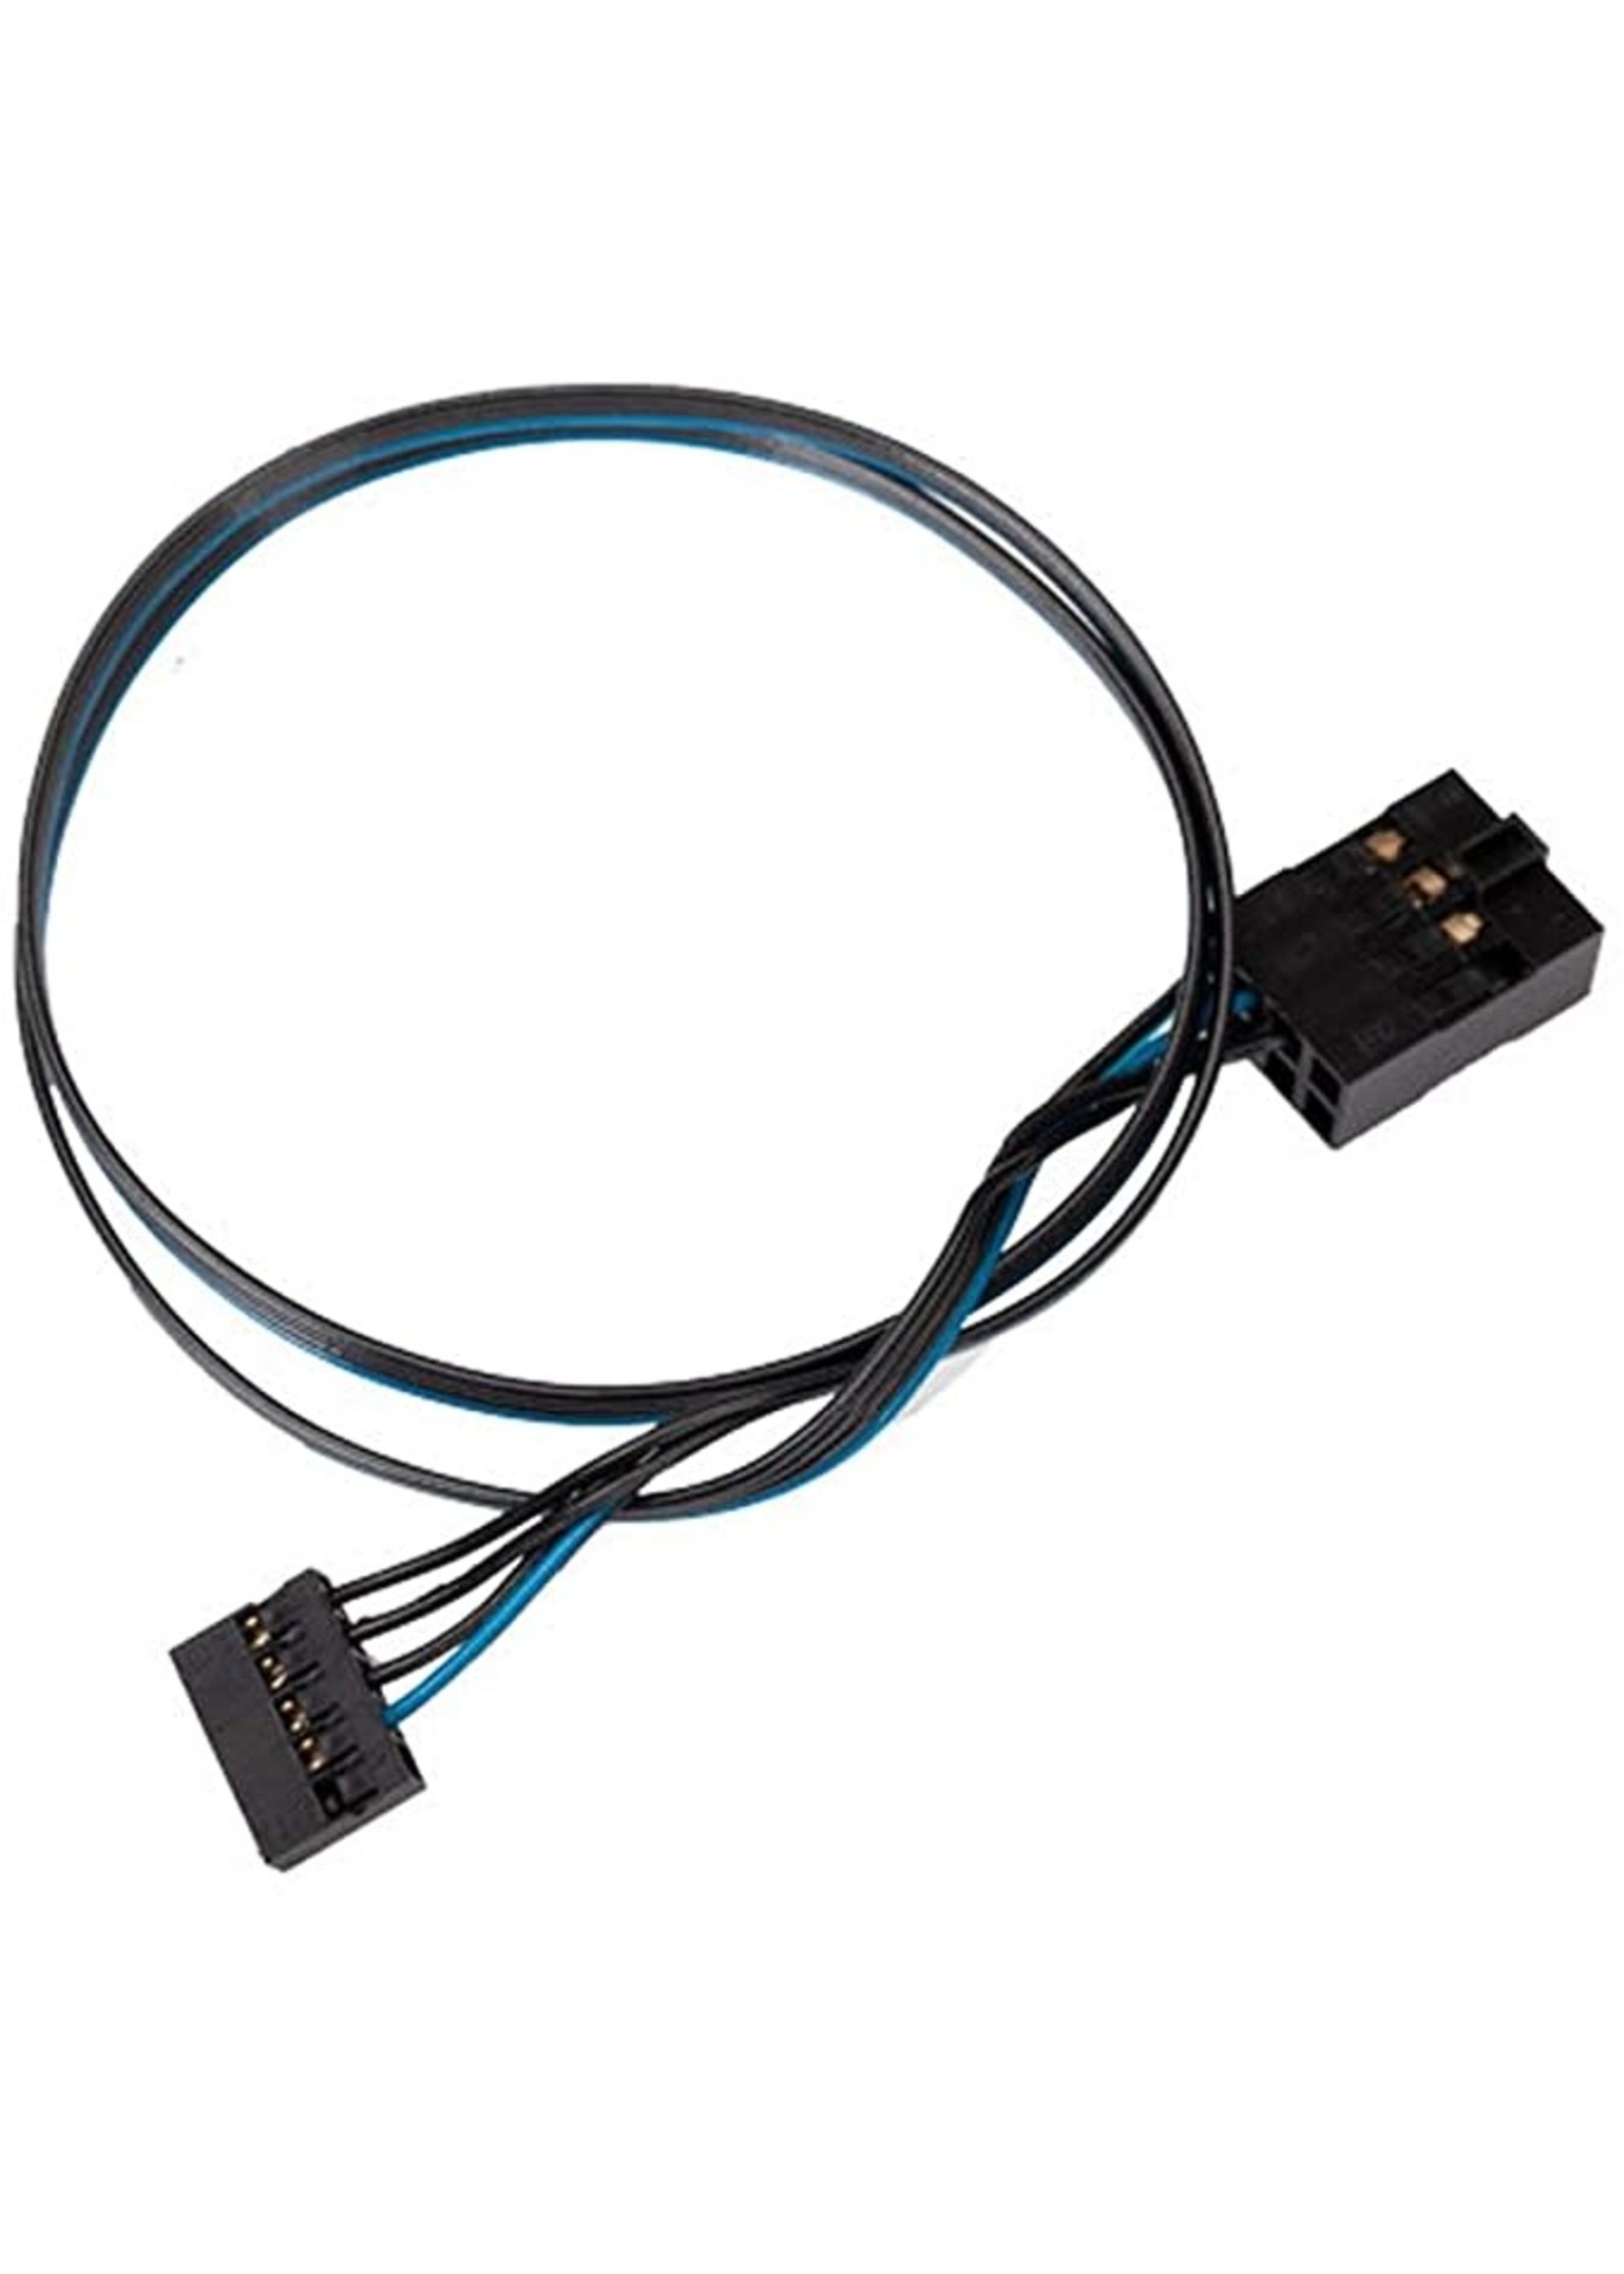 Traxxas 6566 Data link, telemetry expander (connects #6550X telemetry expander 2.0 to the #3485 VXL-6s or #3496 VXL-8s electronic speed control)